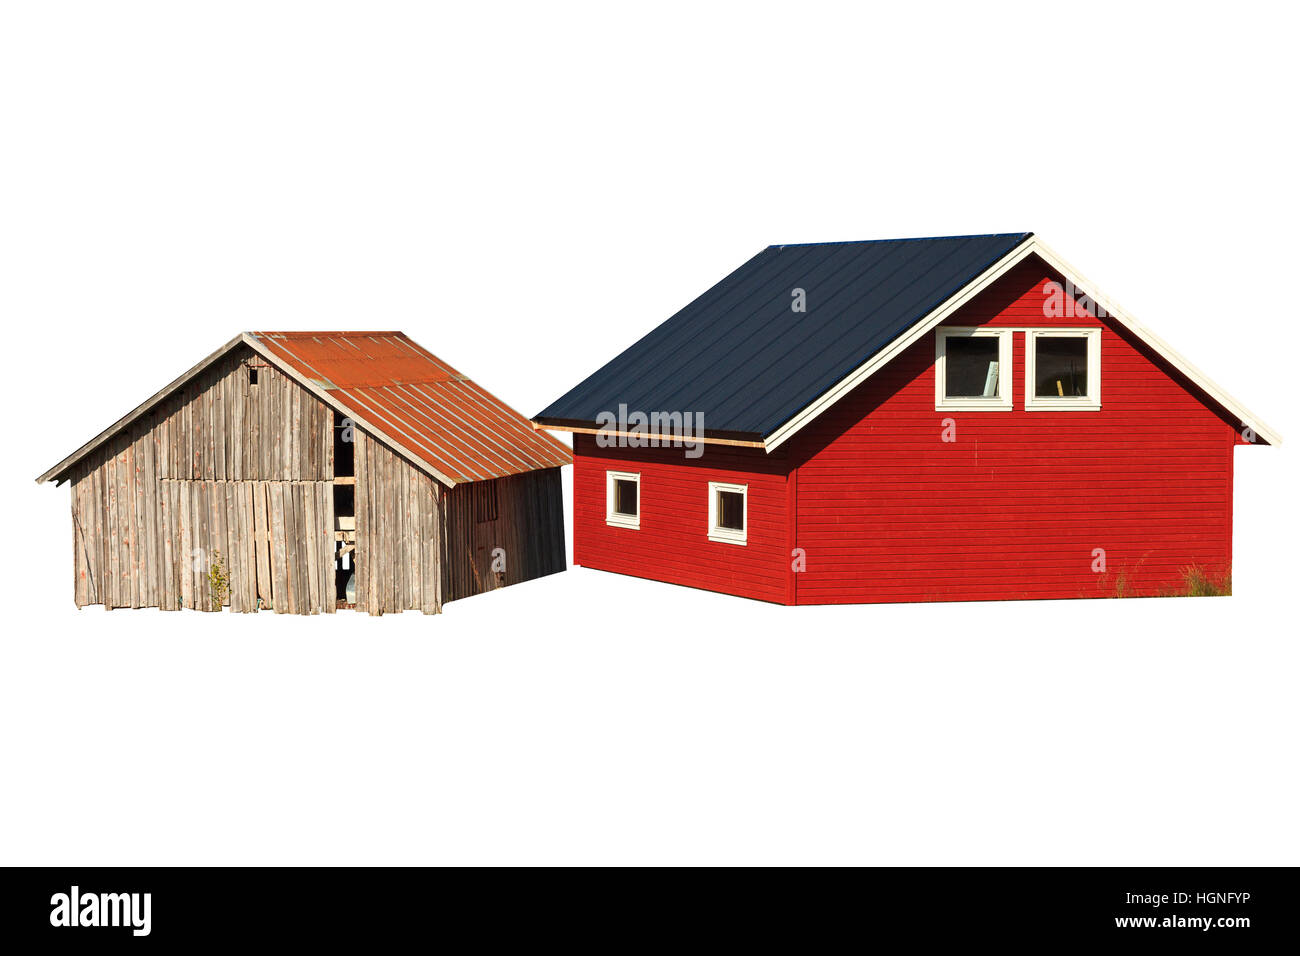 Colored houses isolated on a white background,Scandinavia, wooden houses, Norway, Sweden Stock Photo